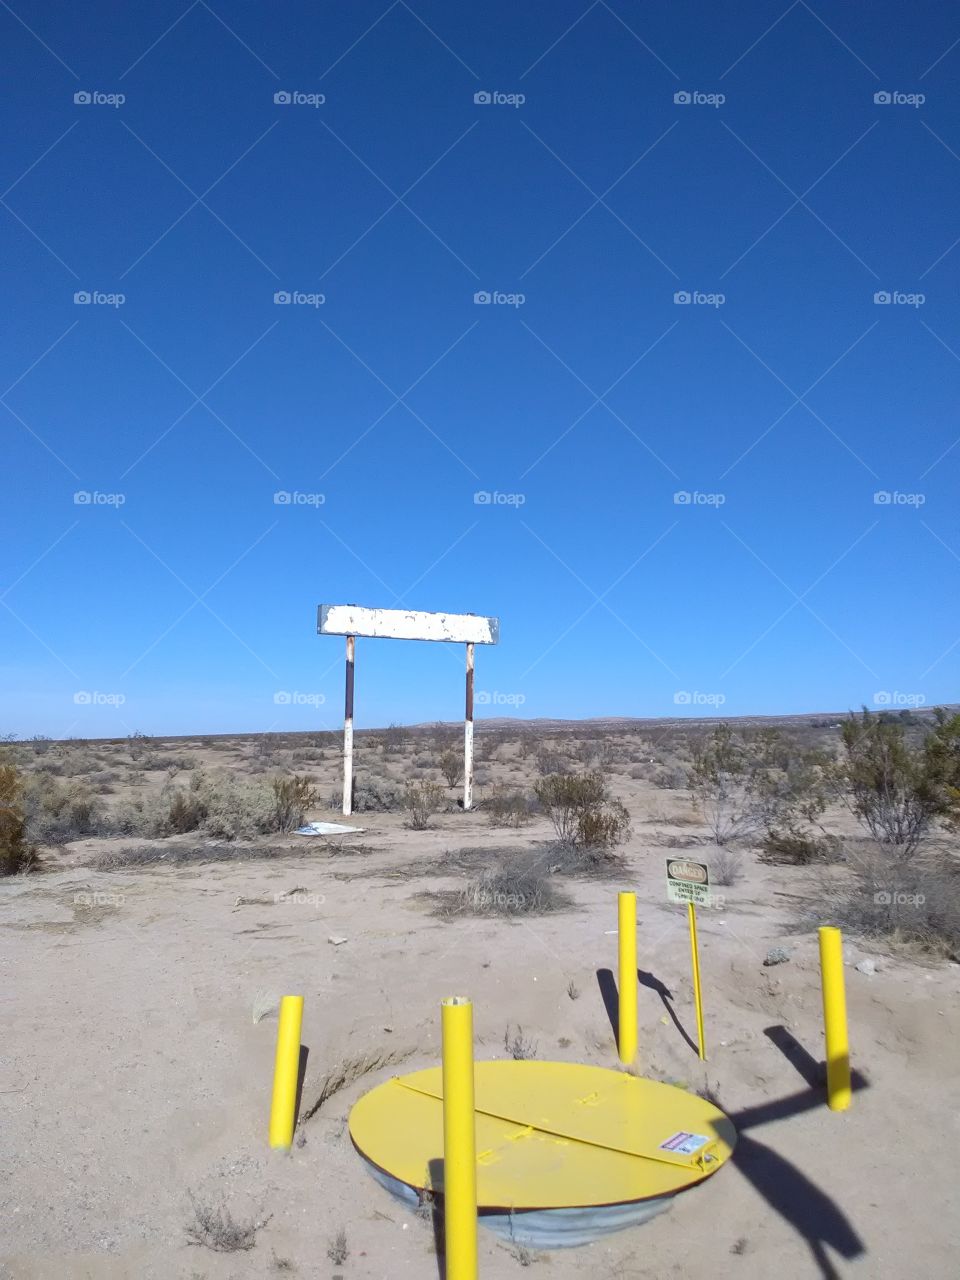 rusty sign in the middle of deserts